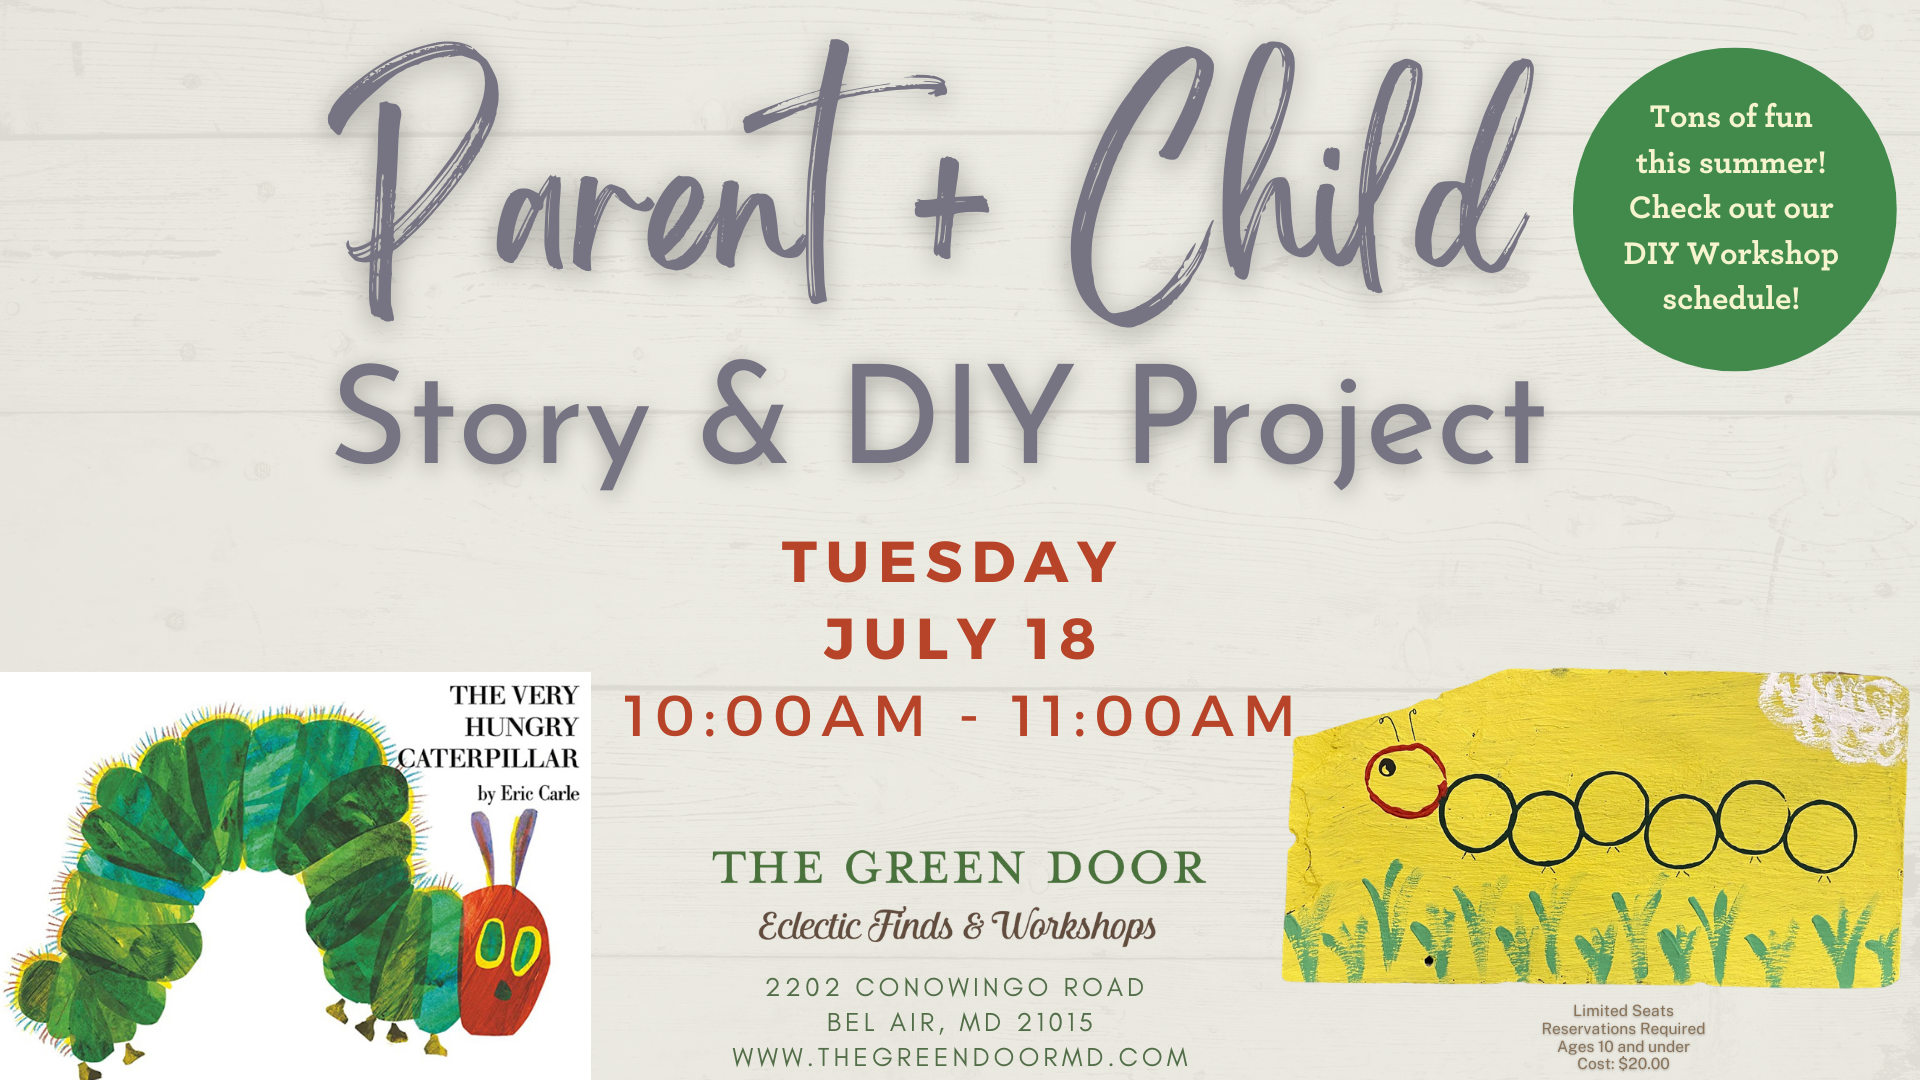 Parent + Child – Story & DIY Project - Tuesday July 18 • 10:00AM